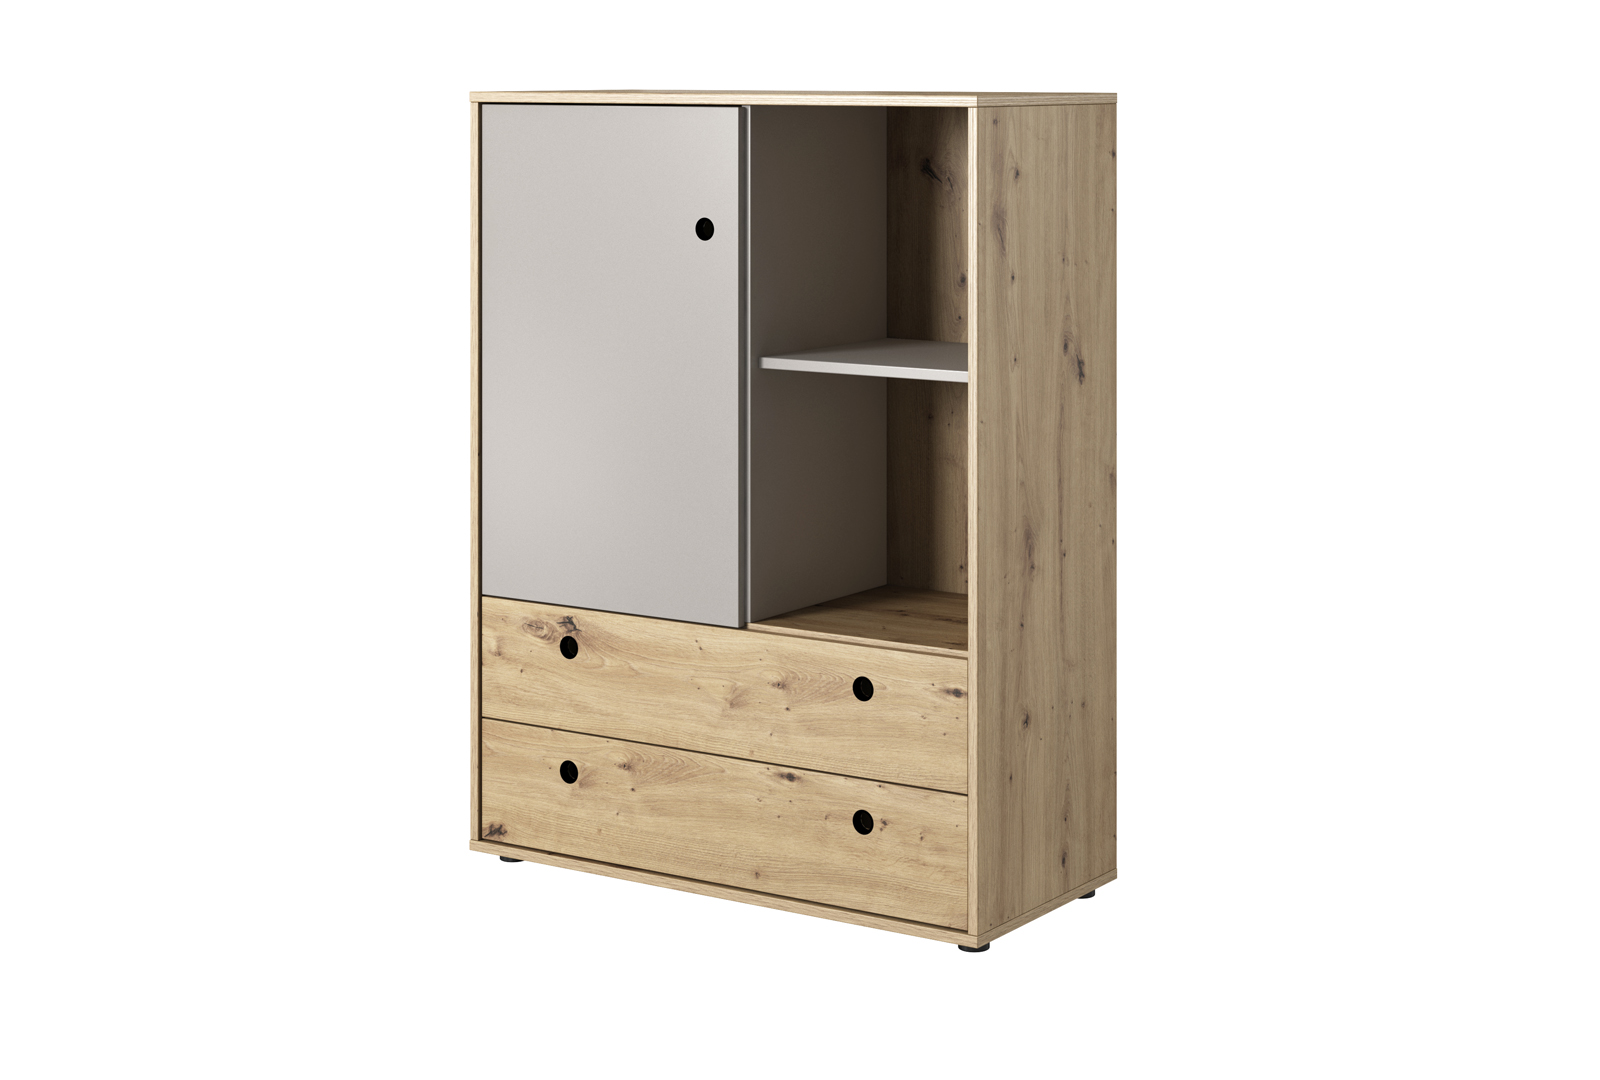 KUKI chest of drawers d2s